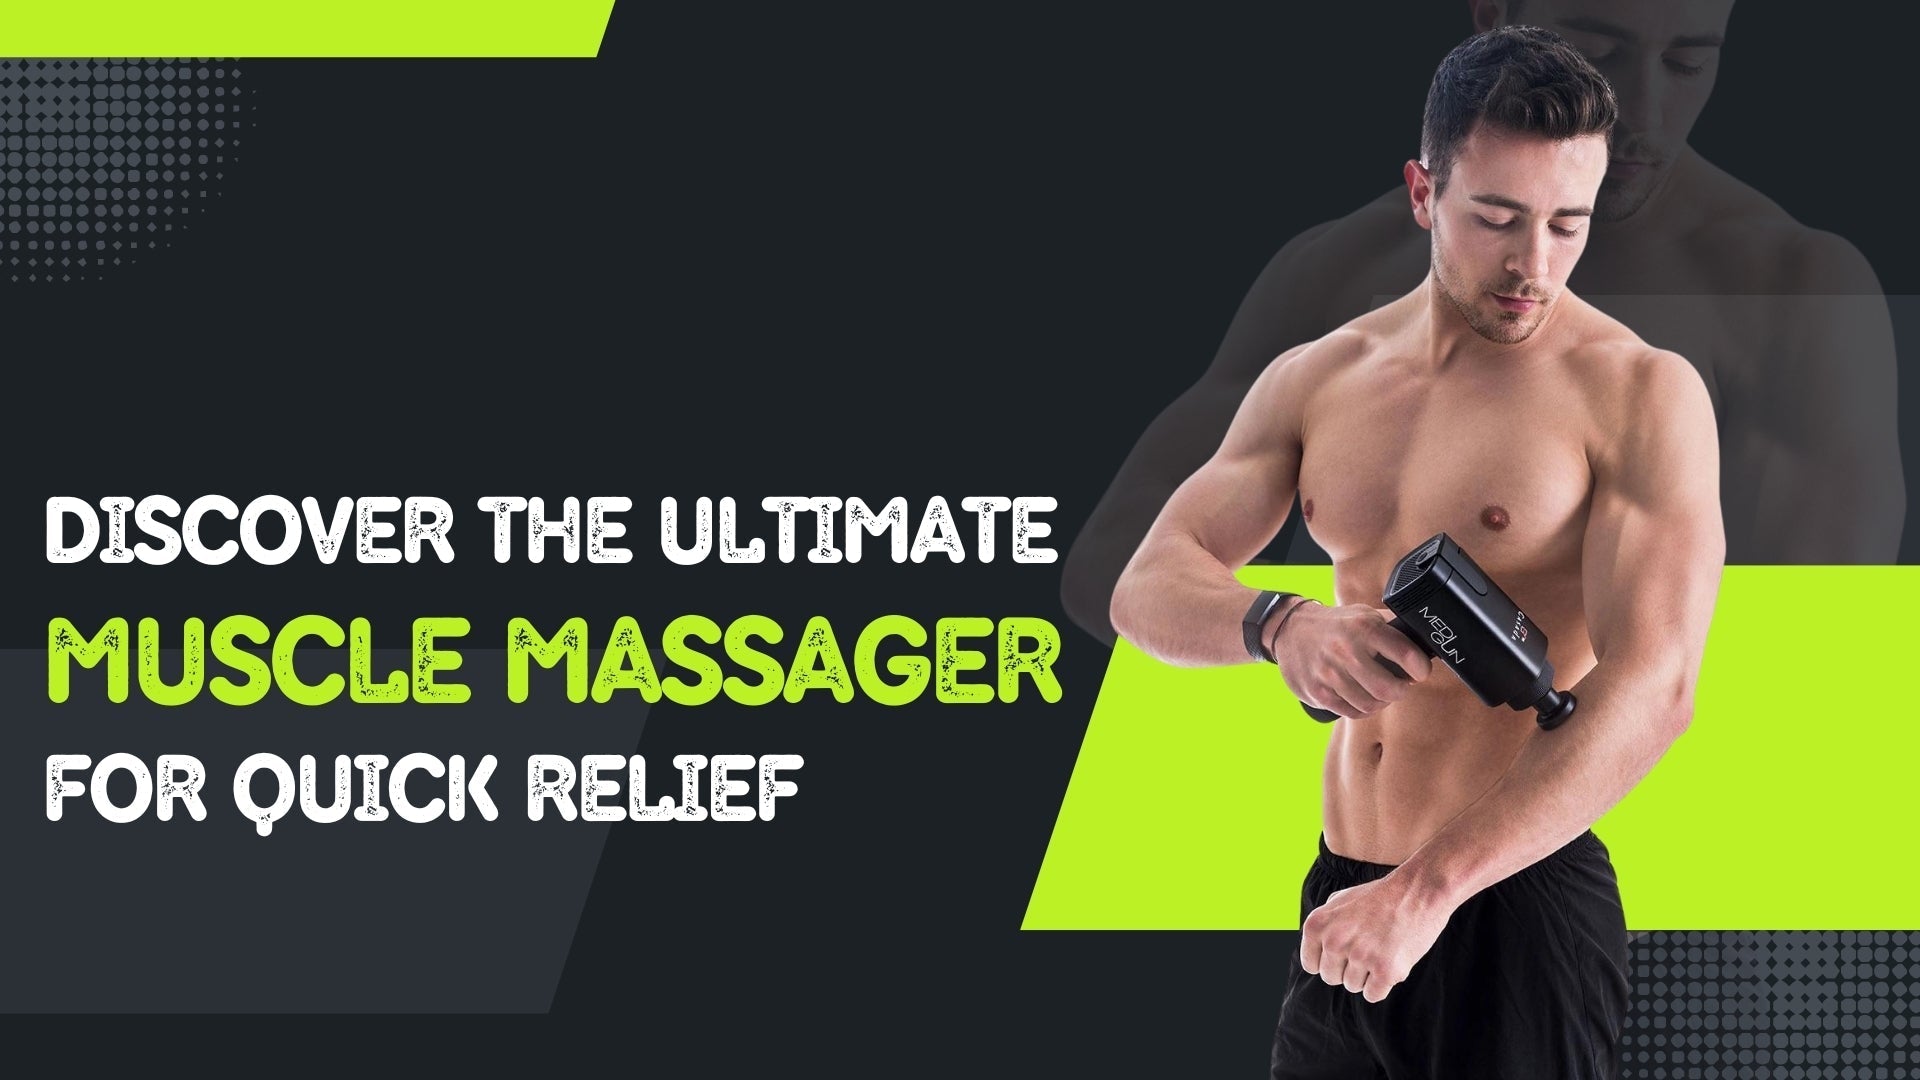 Discover The Ultimate Muscle Massager For Quick Relief